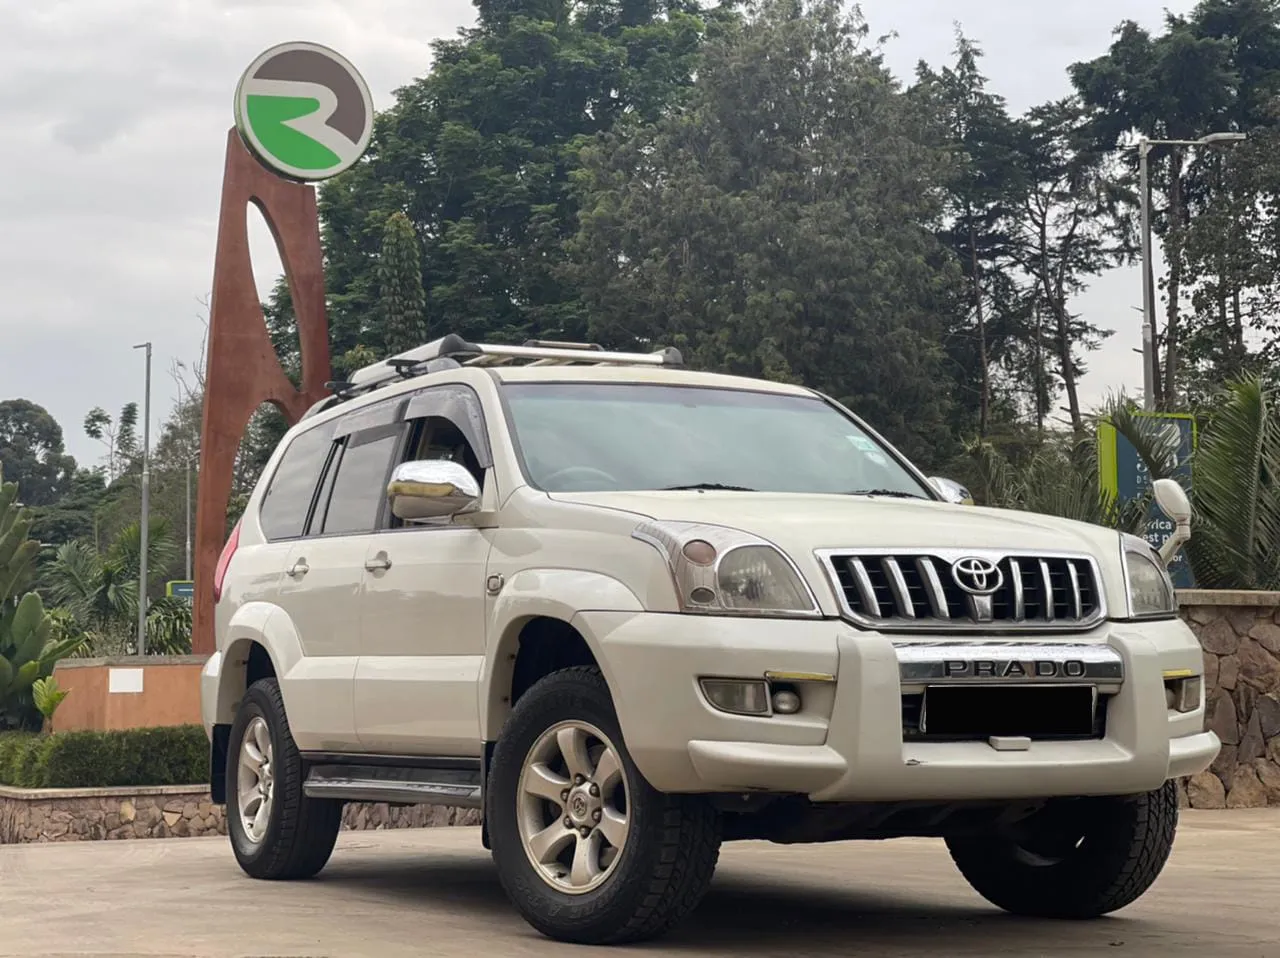 Cars Cars For Sale/Vehicles SUV-Toyota Prado 1.5M Sunroof 7 Leather seats -Pay 20% 80% in 60 MONTHLY INSTALLMENTS 3